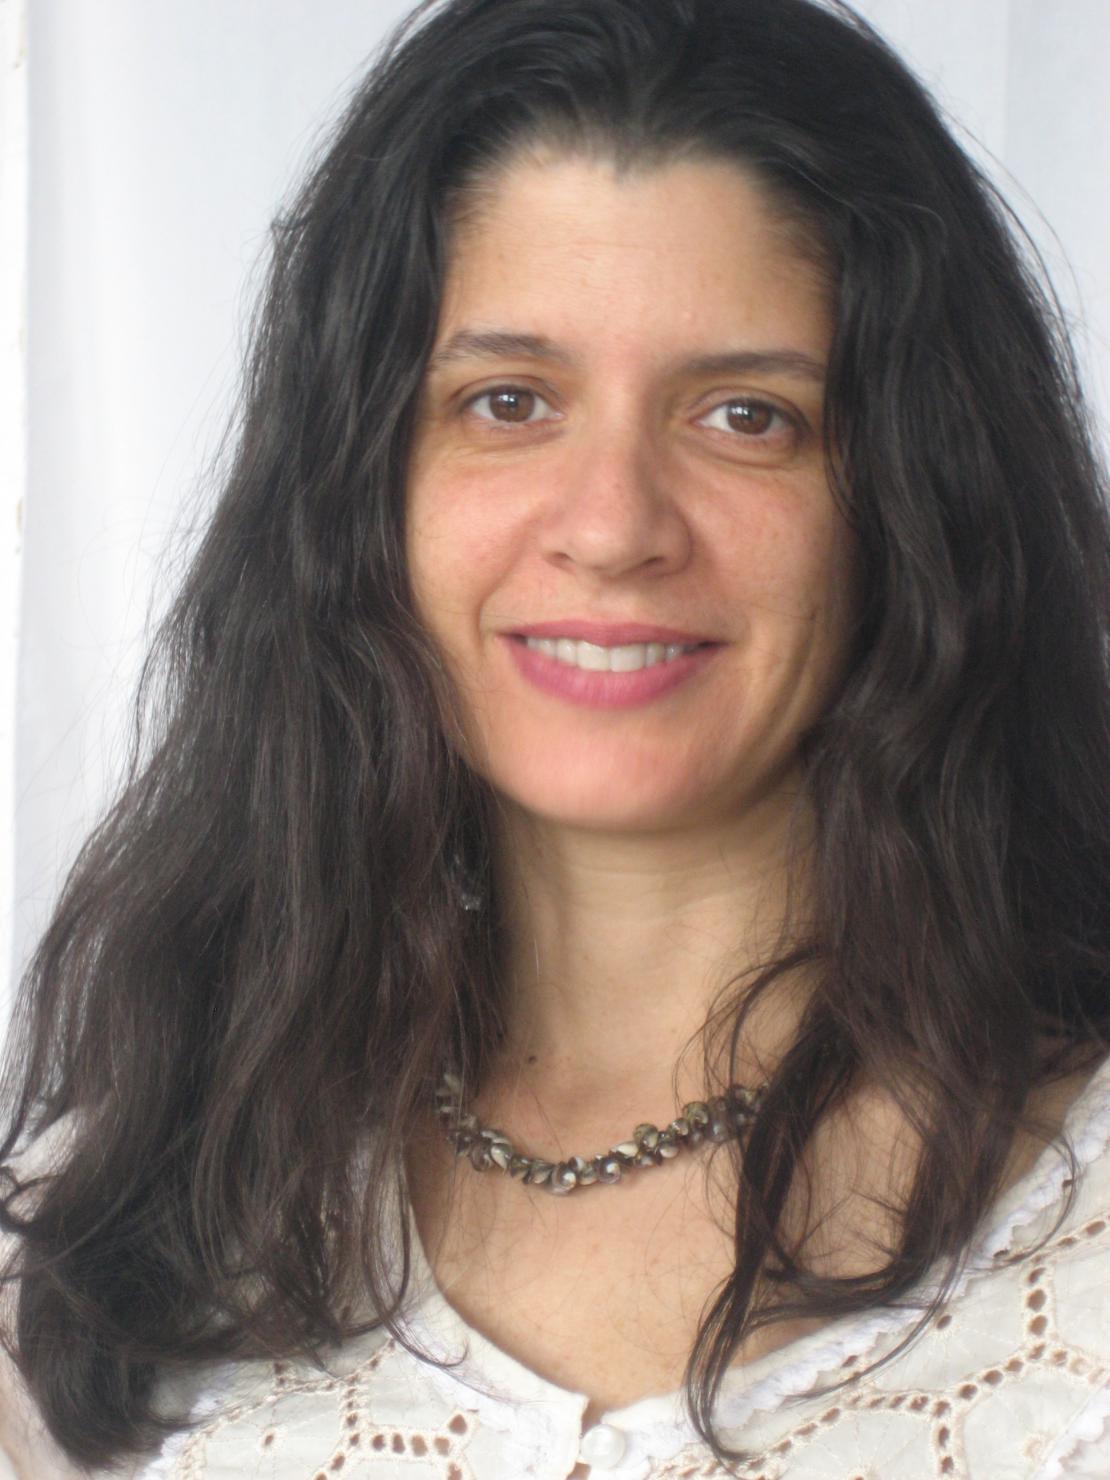 Photographic color portrait of an olive-skinned woman with long dark hair. She is wearing a white blouse and smiling at the camera.